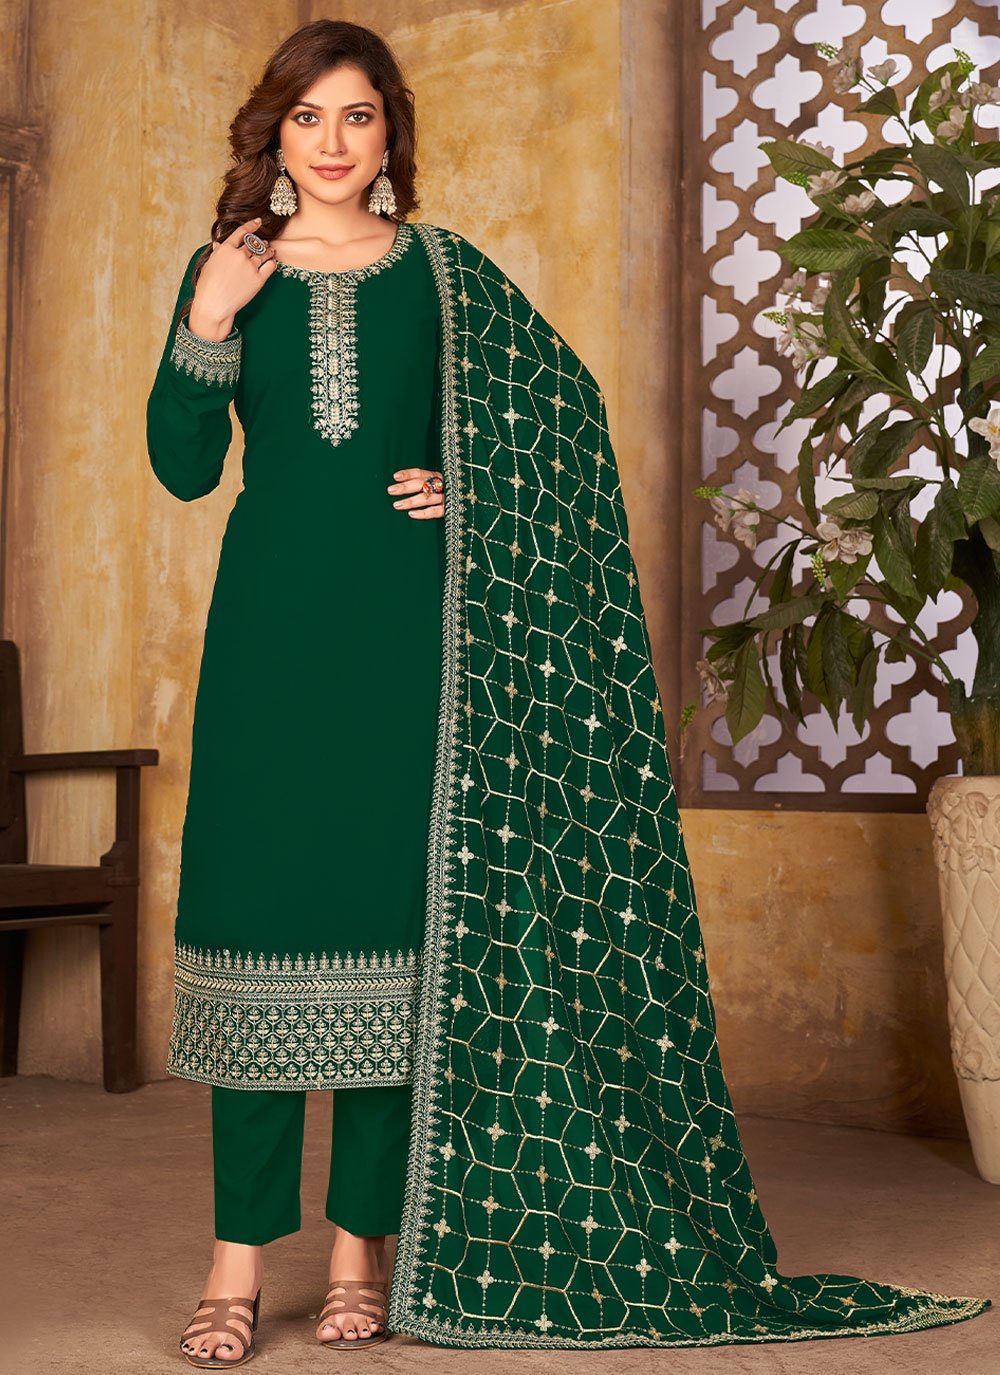 Green Salwar Suit in Faux Georgette with Embroidered